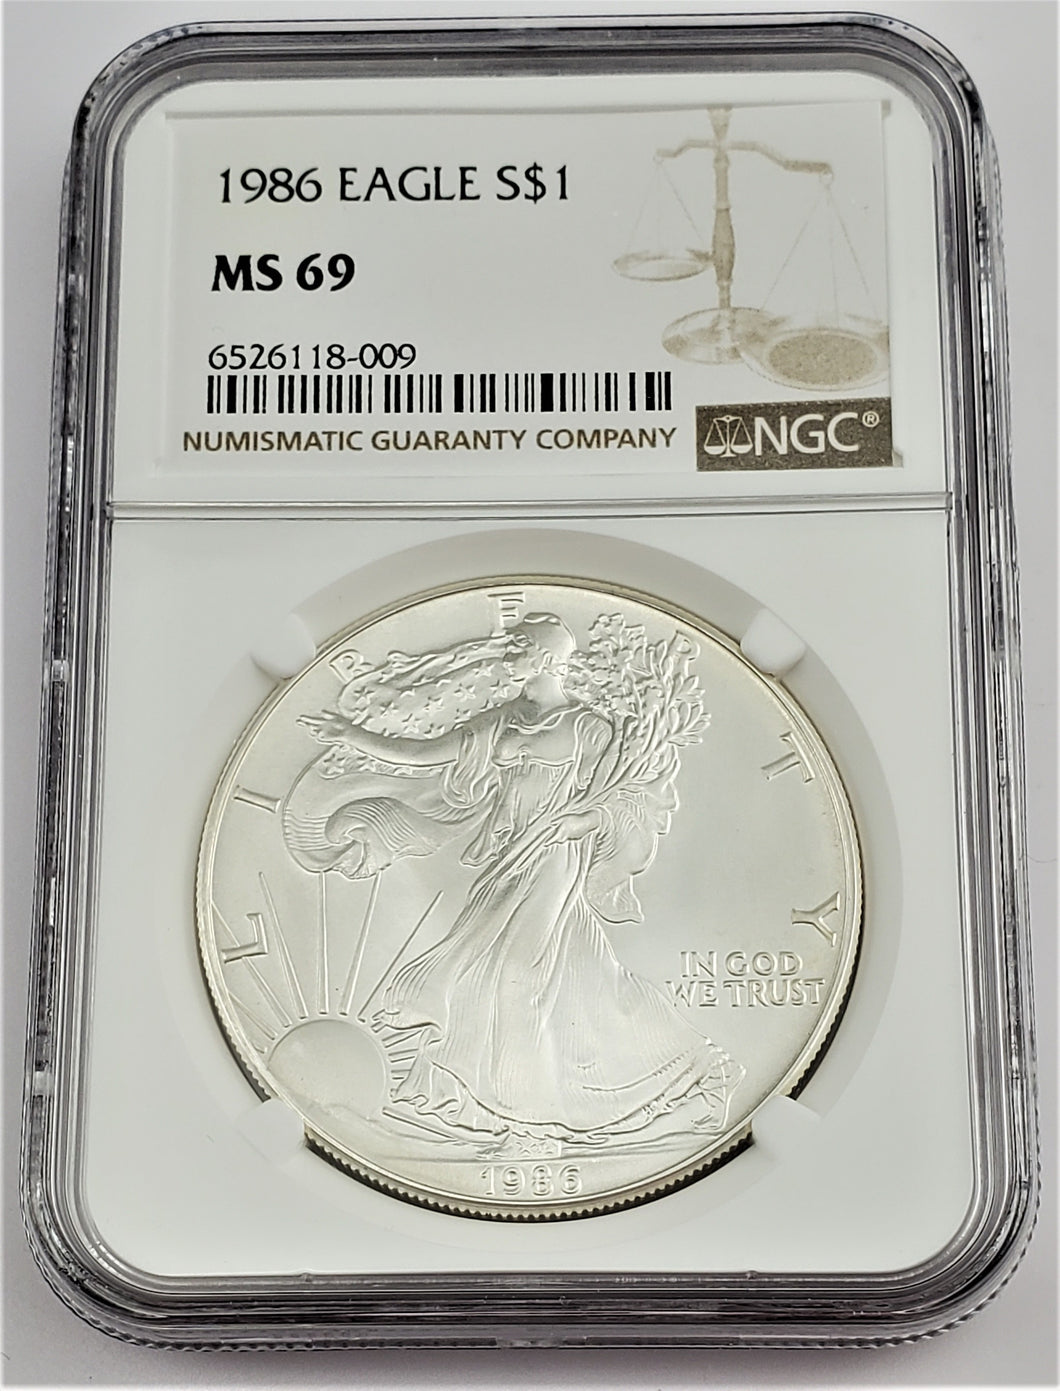 1986 American Silver Eagle $1 NGC MS 69 .999 Fine Silver Coin